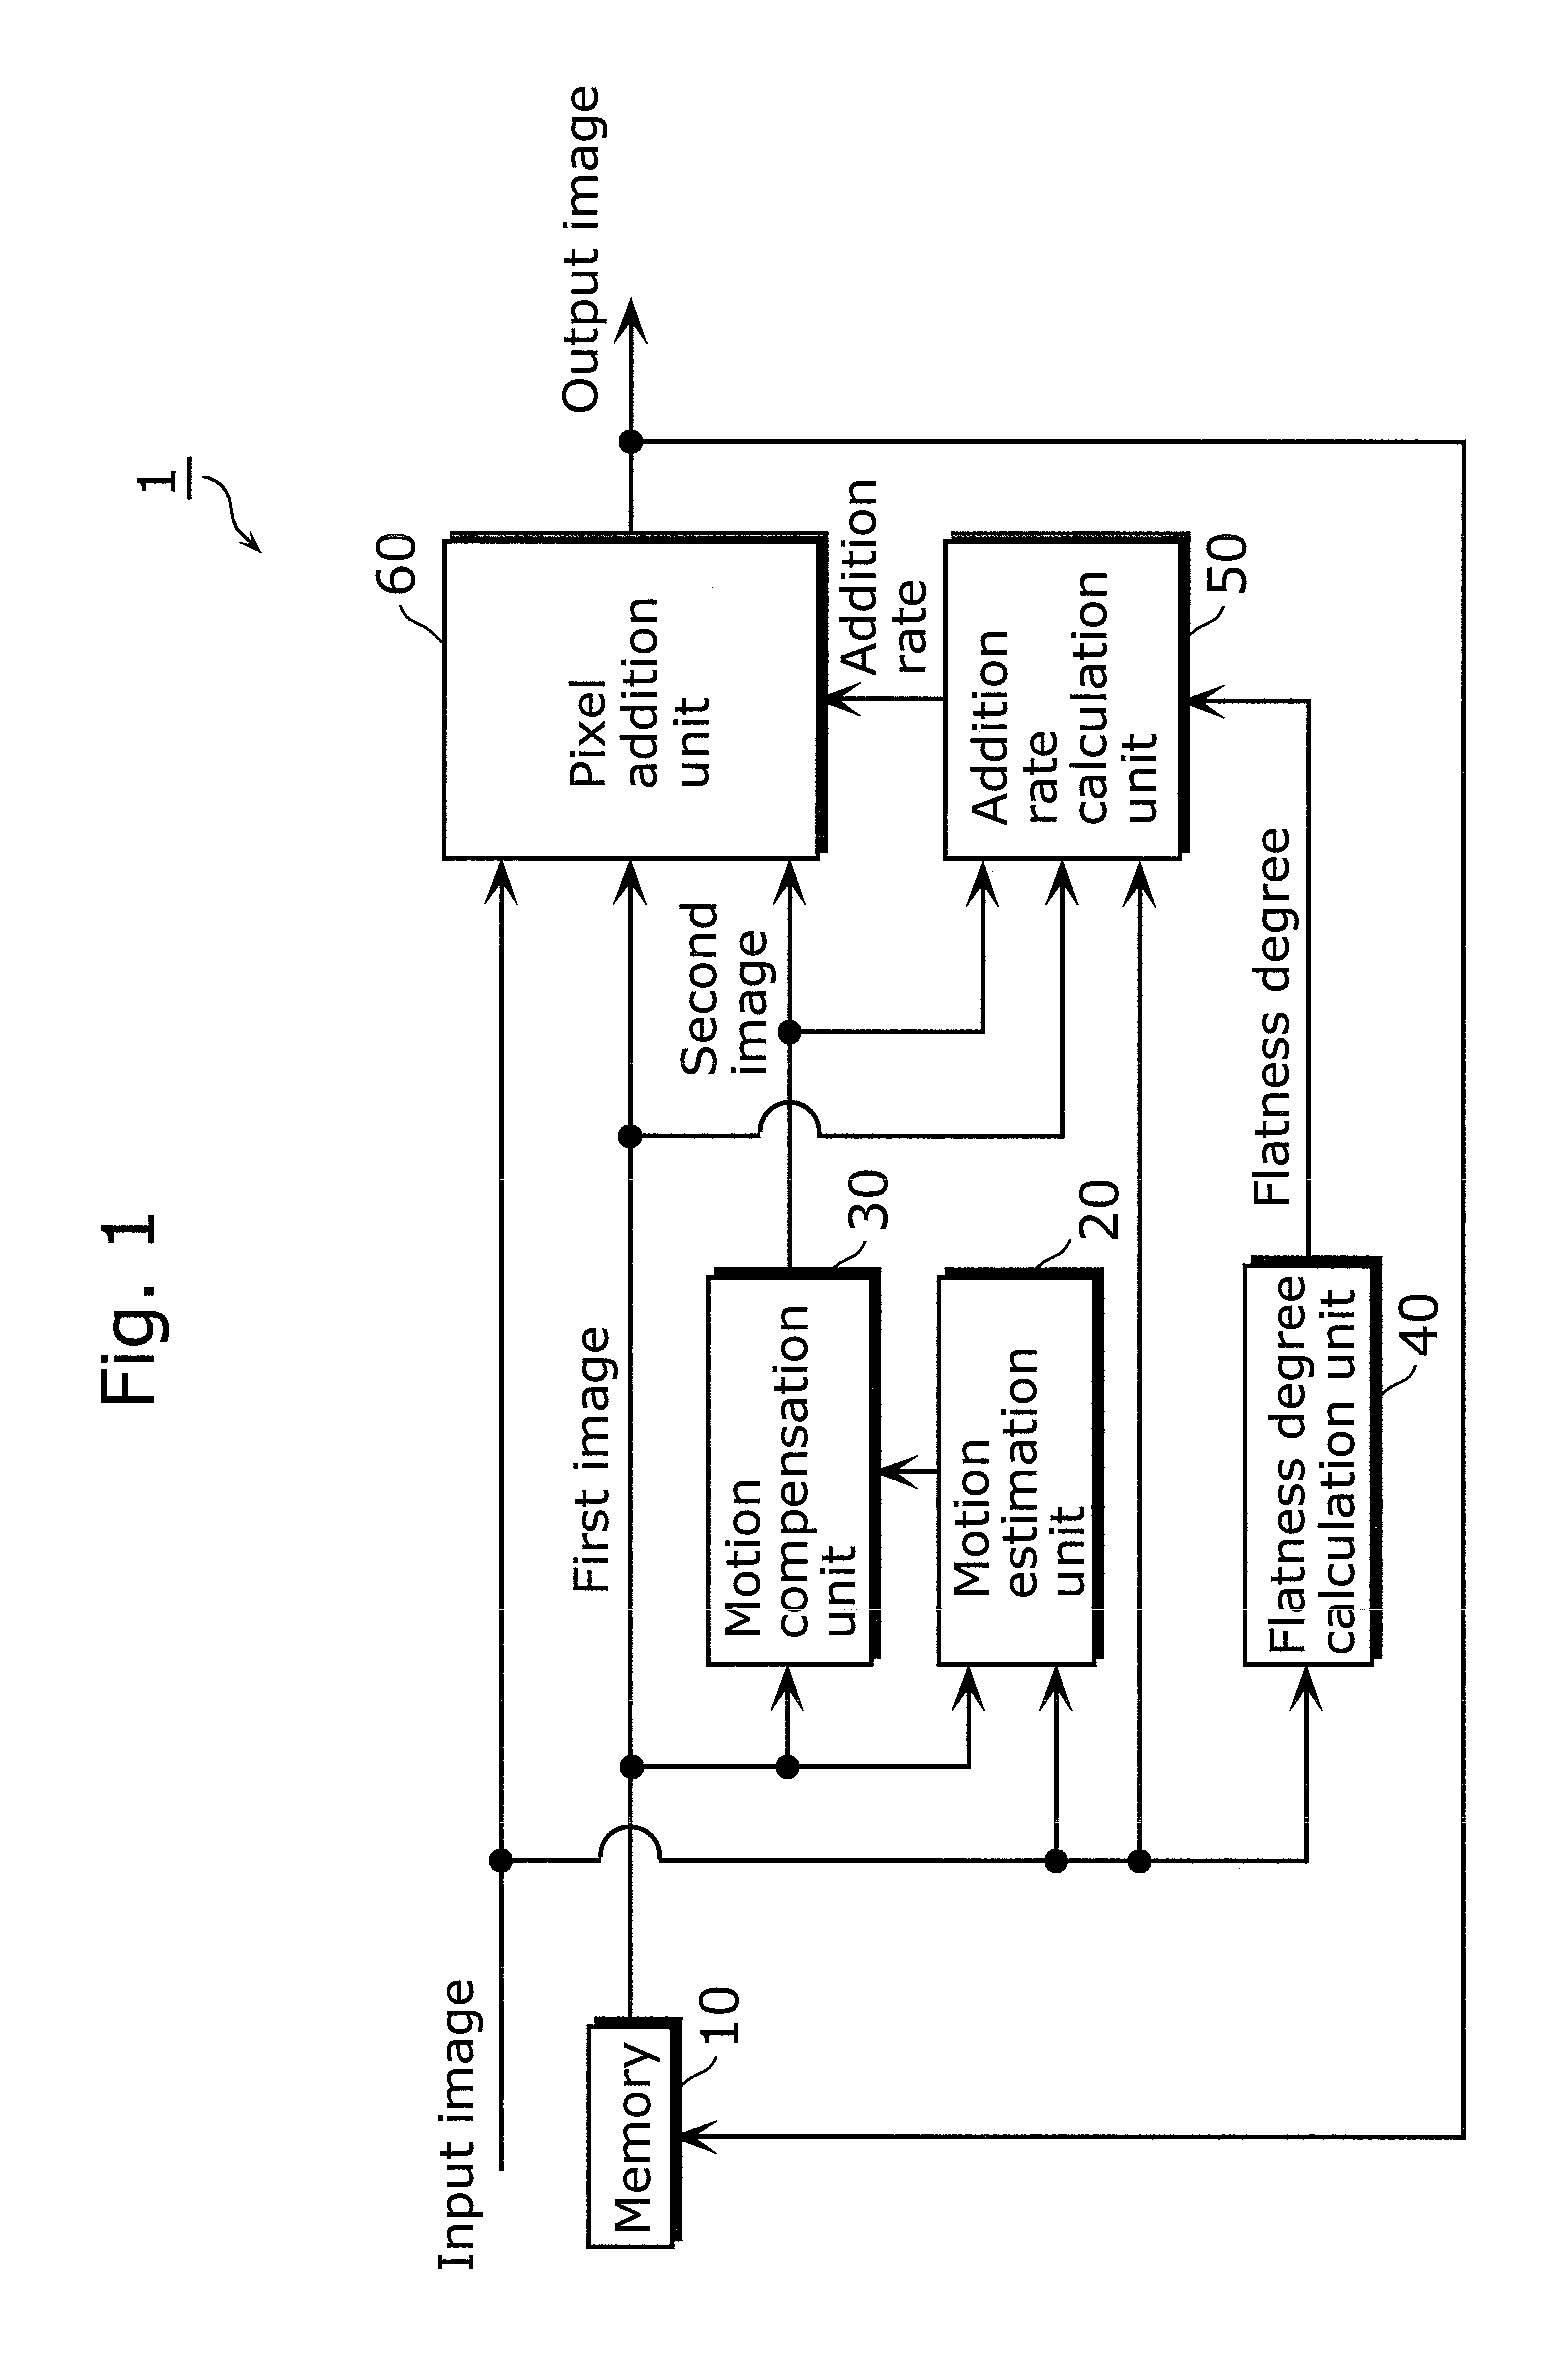 Image processing system and method for noise reduction